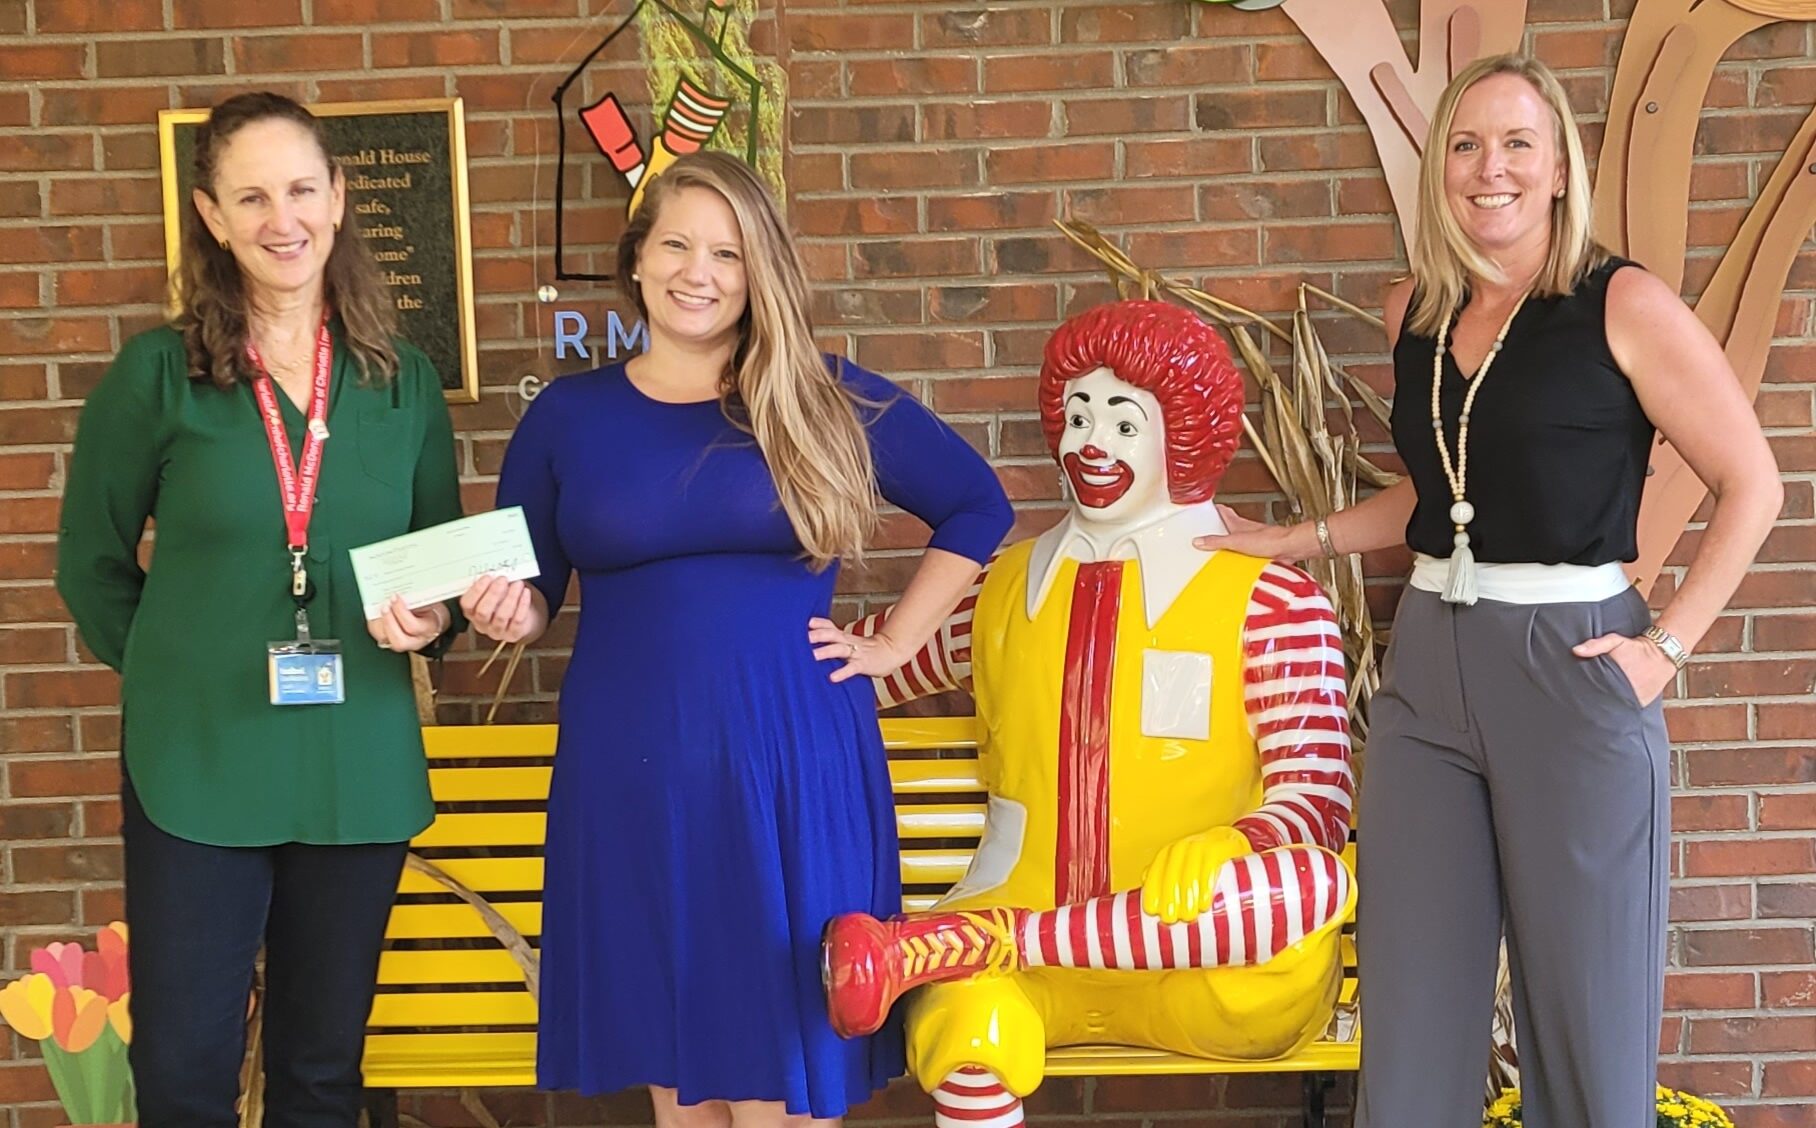 Ronald McDonald House Charities of Greater Charlotte receives the next $1,000 donation from M&G Gives